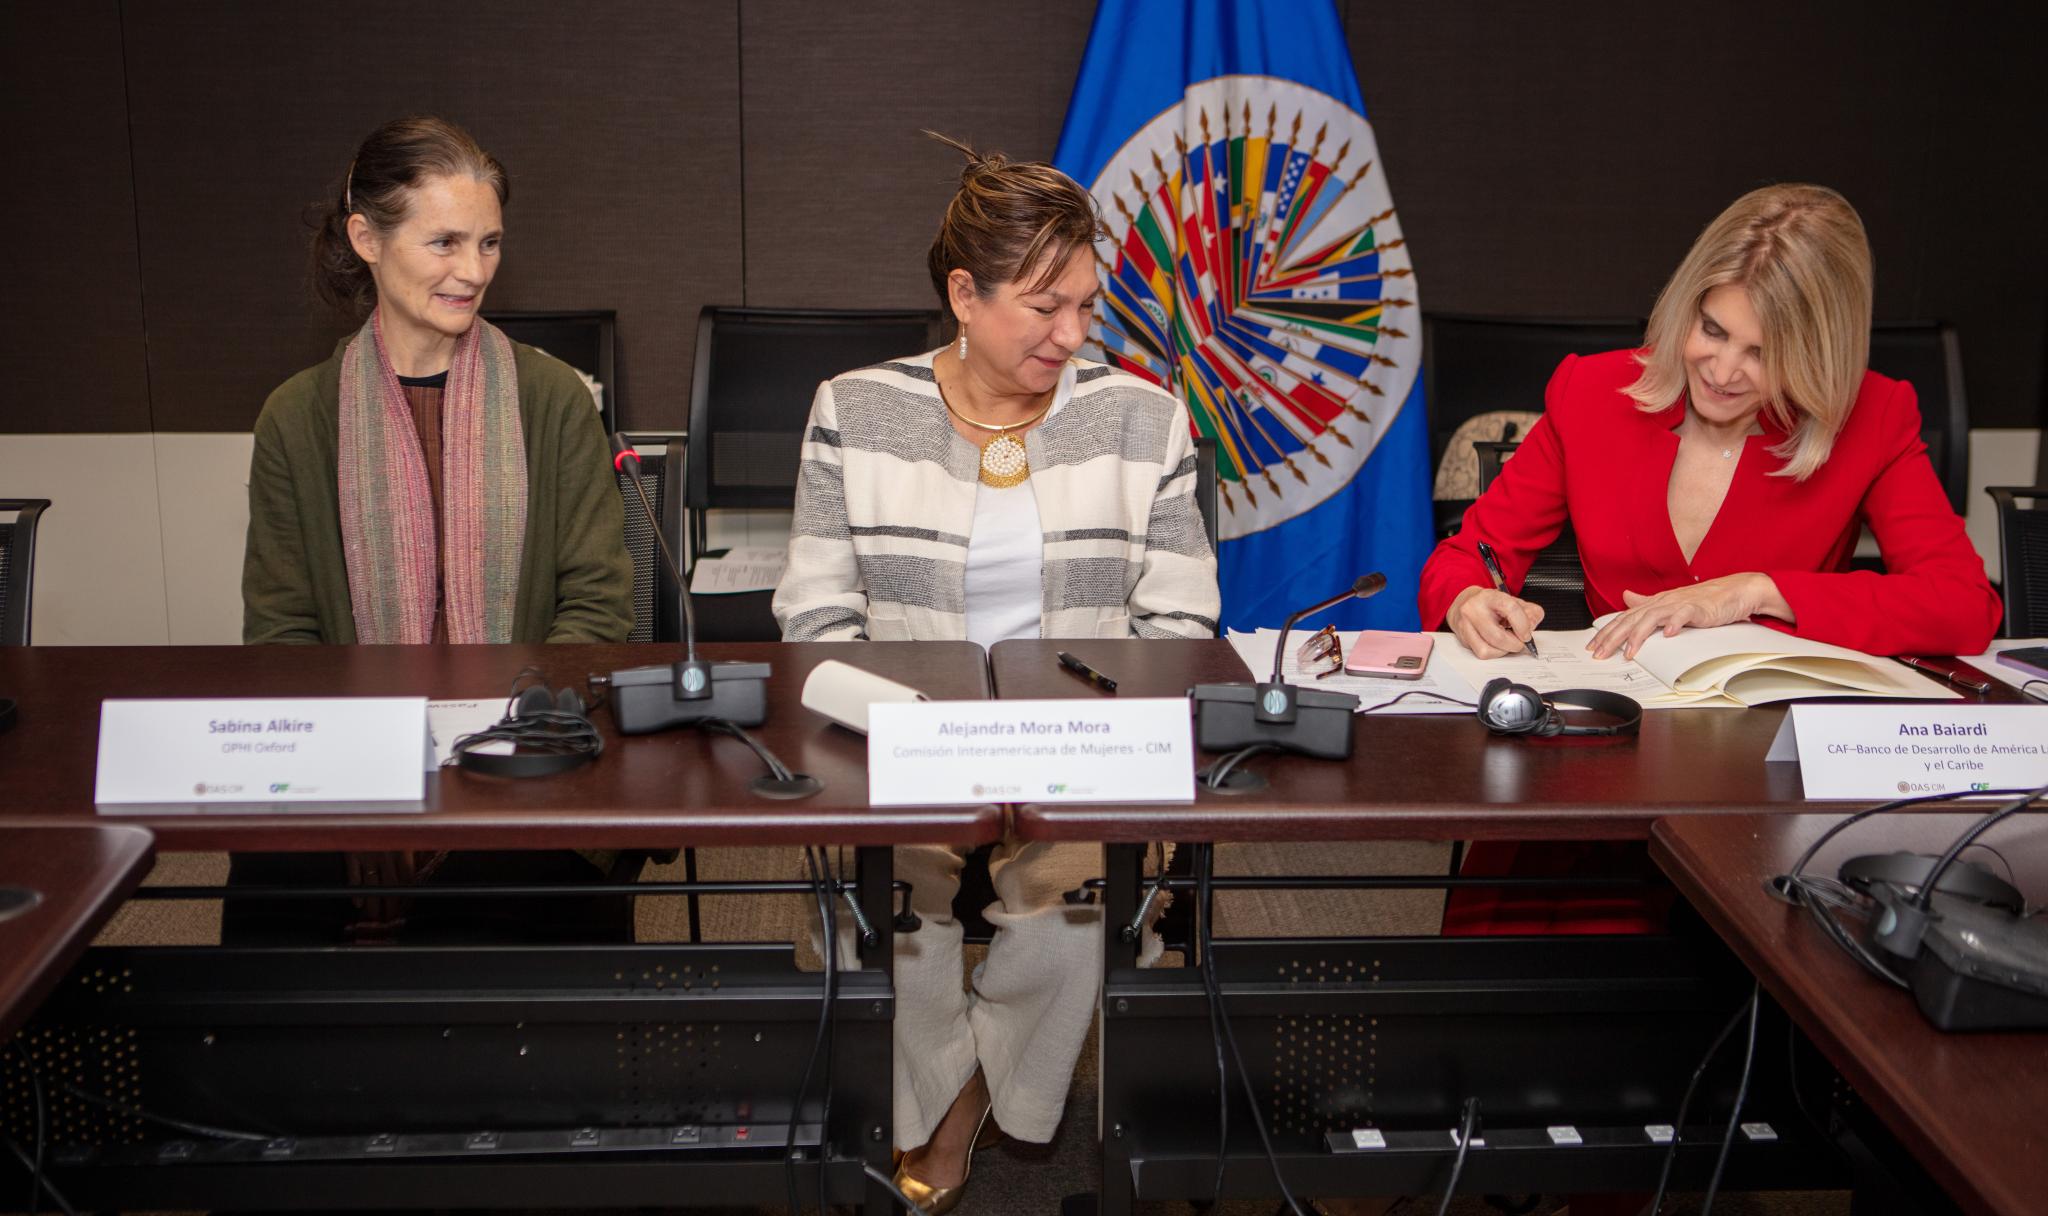 Collaboration between OAS CIM and OPHI